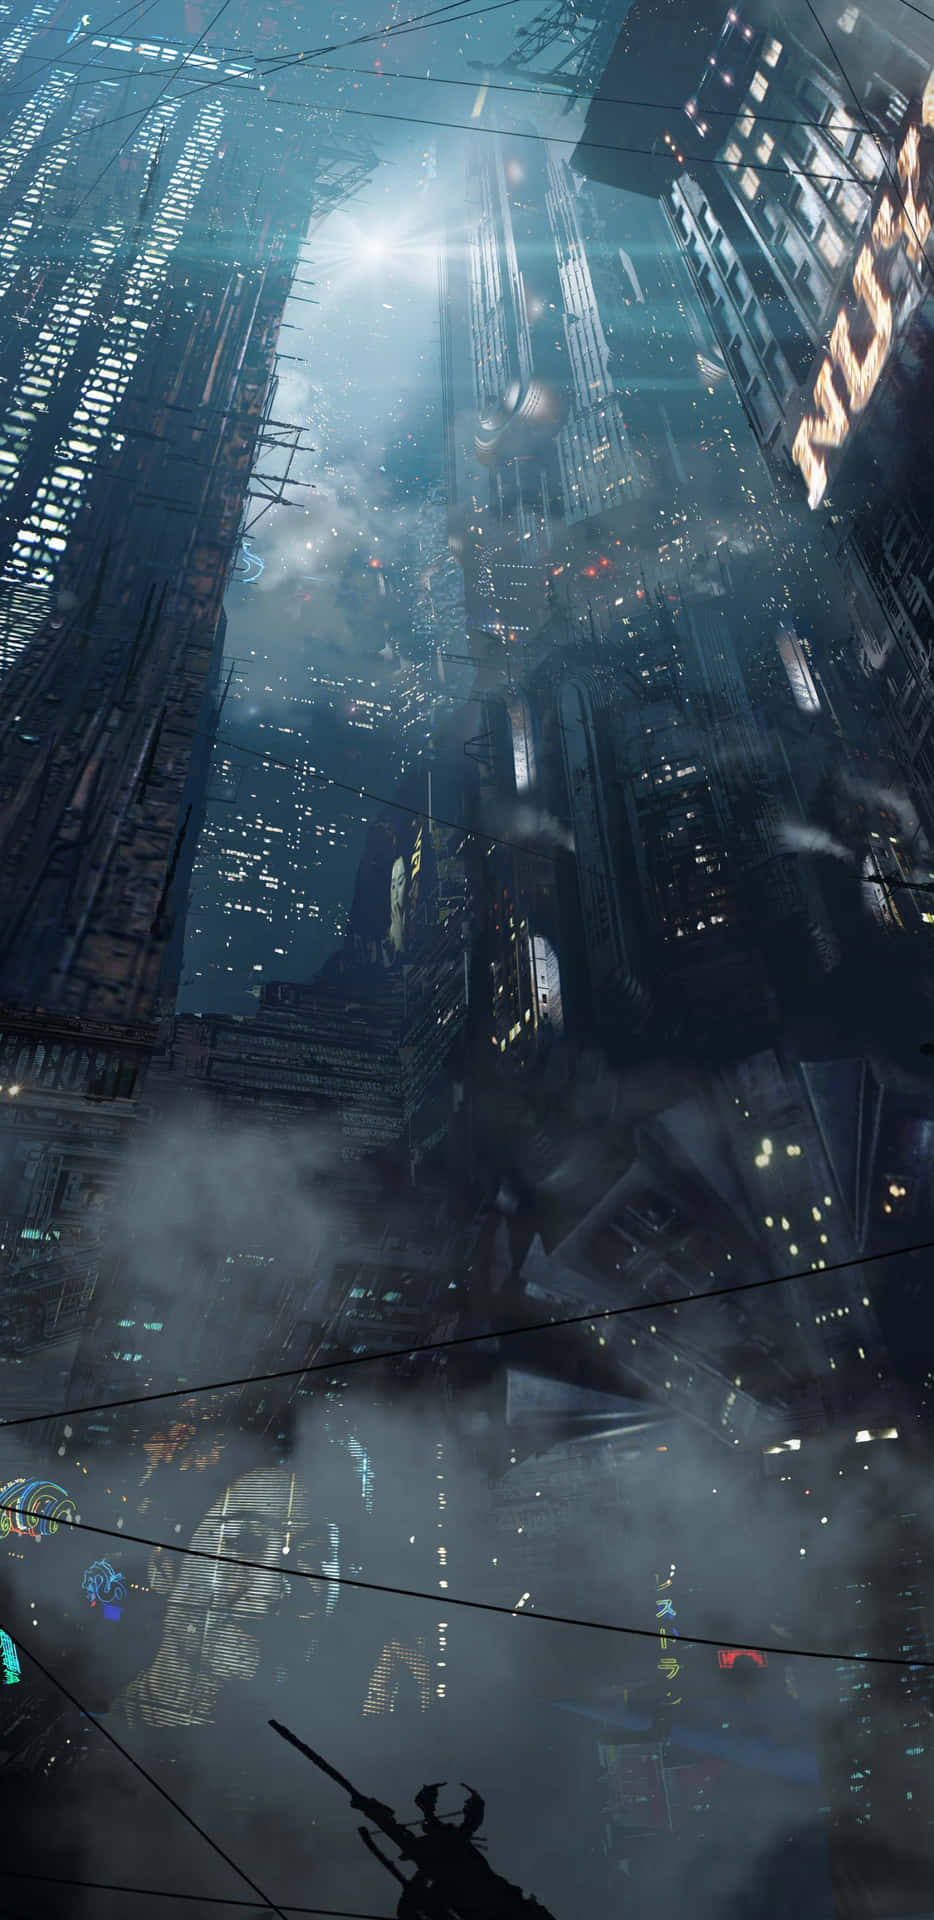 The Dystopian Landscape of Blade Runner